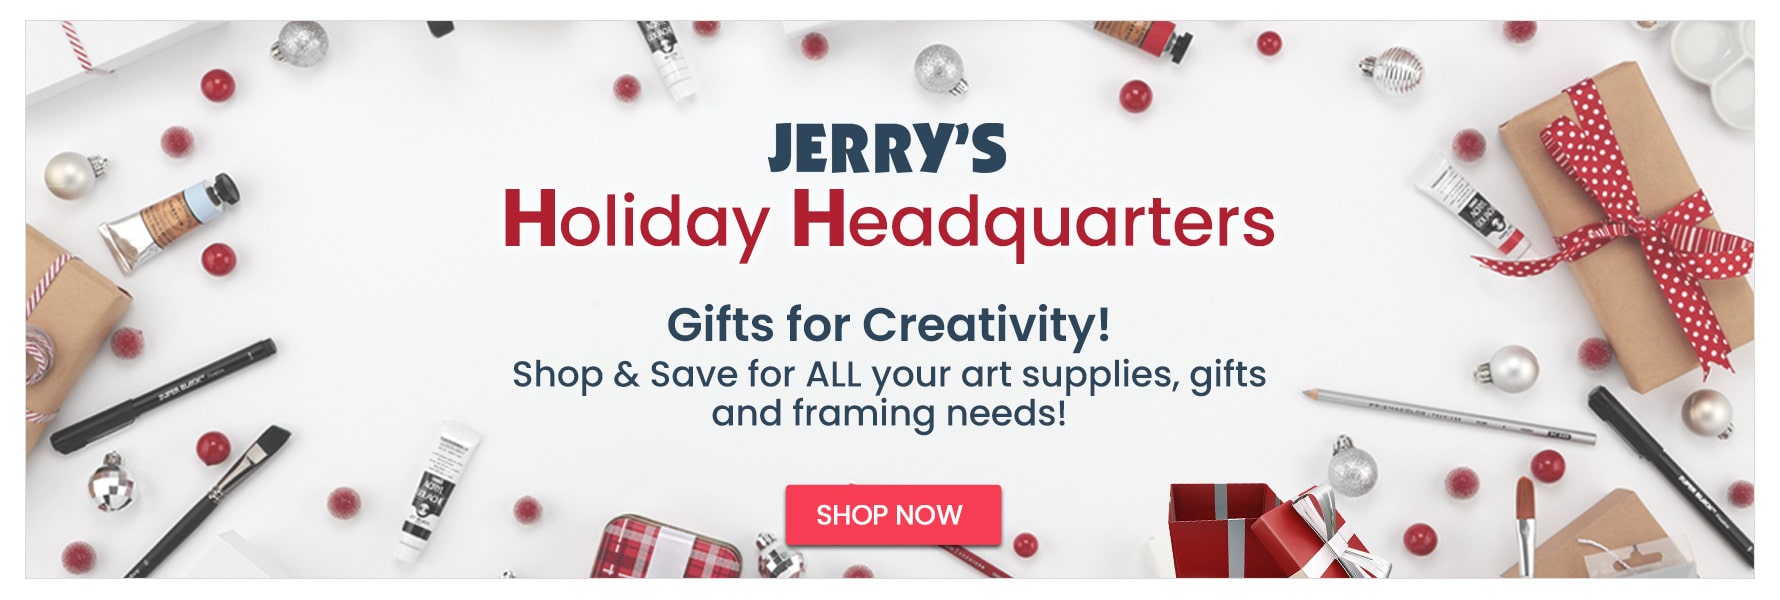 Shop Jerry's Holiday Headquarters for Great Gifts